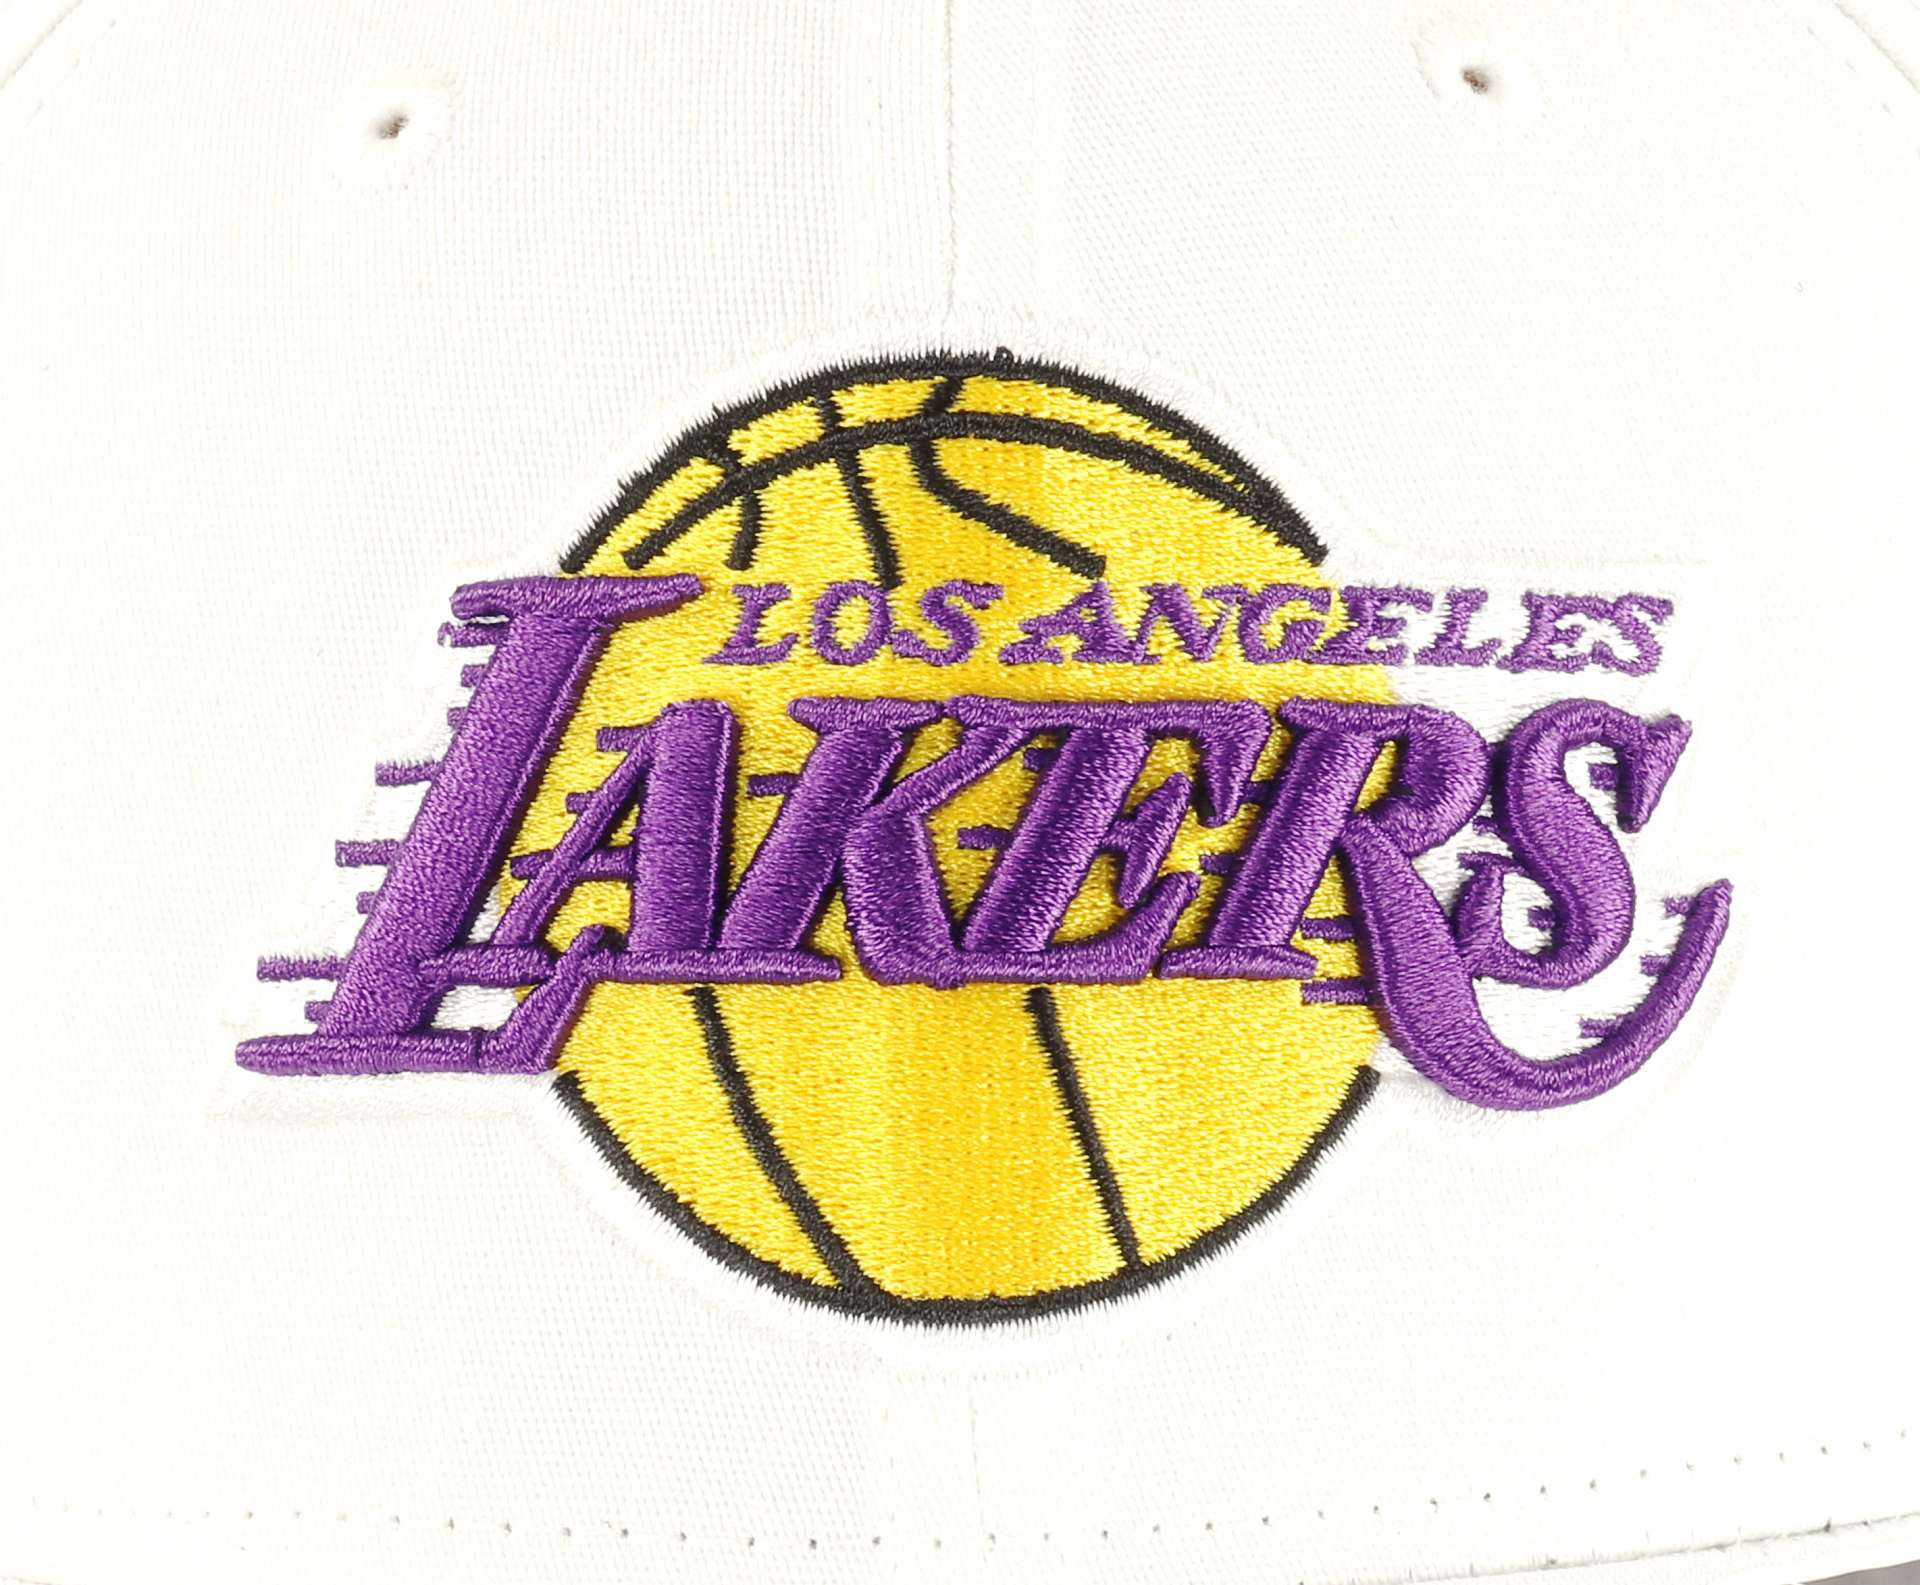 Los Angeles Lakers NBA Team Colour White 9Fifty Stretch Snapback Cap New Era